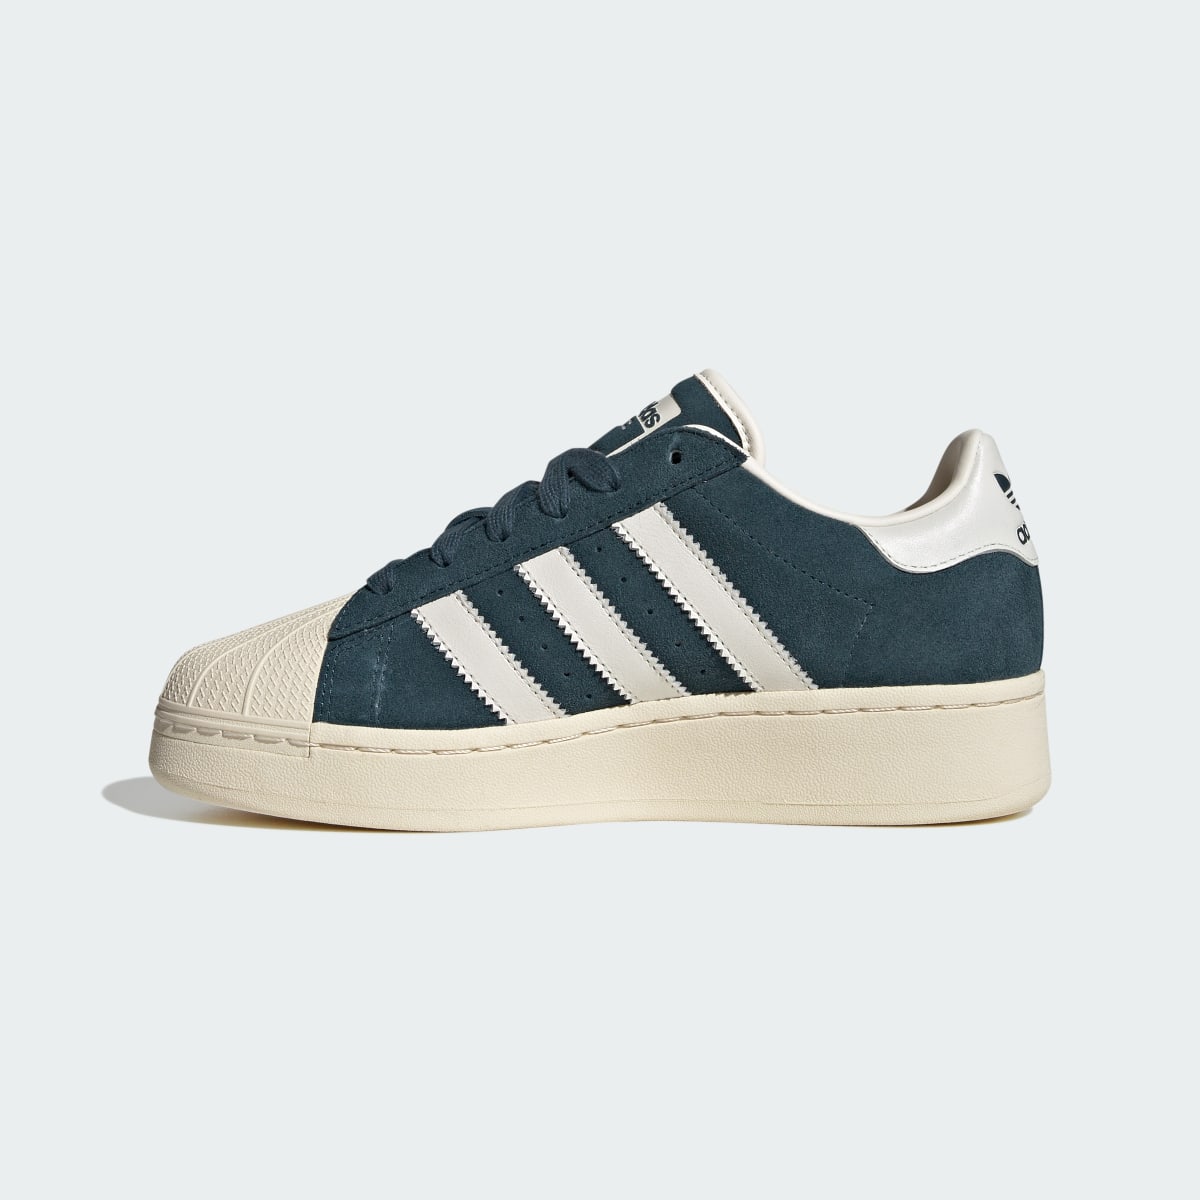 Adidas Superstar XLG Shoes. 8